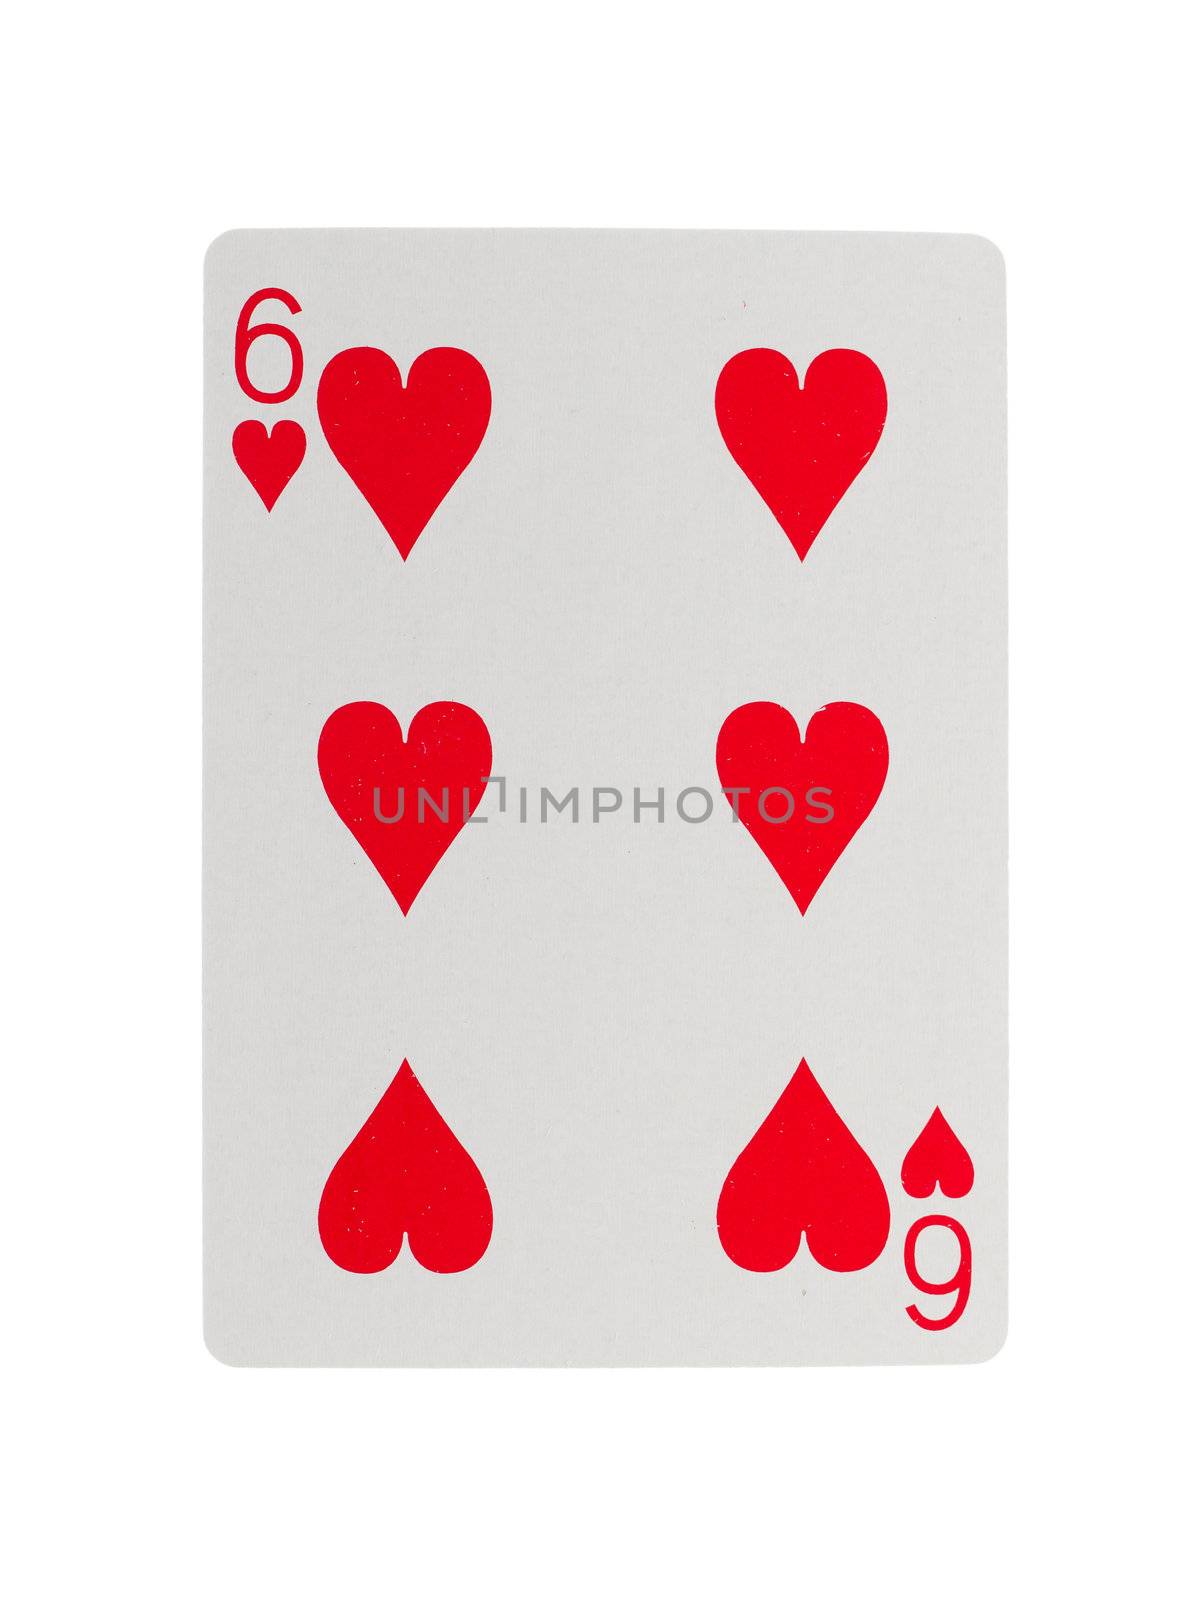 Old playing card (six) isolated on a white background